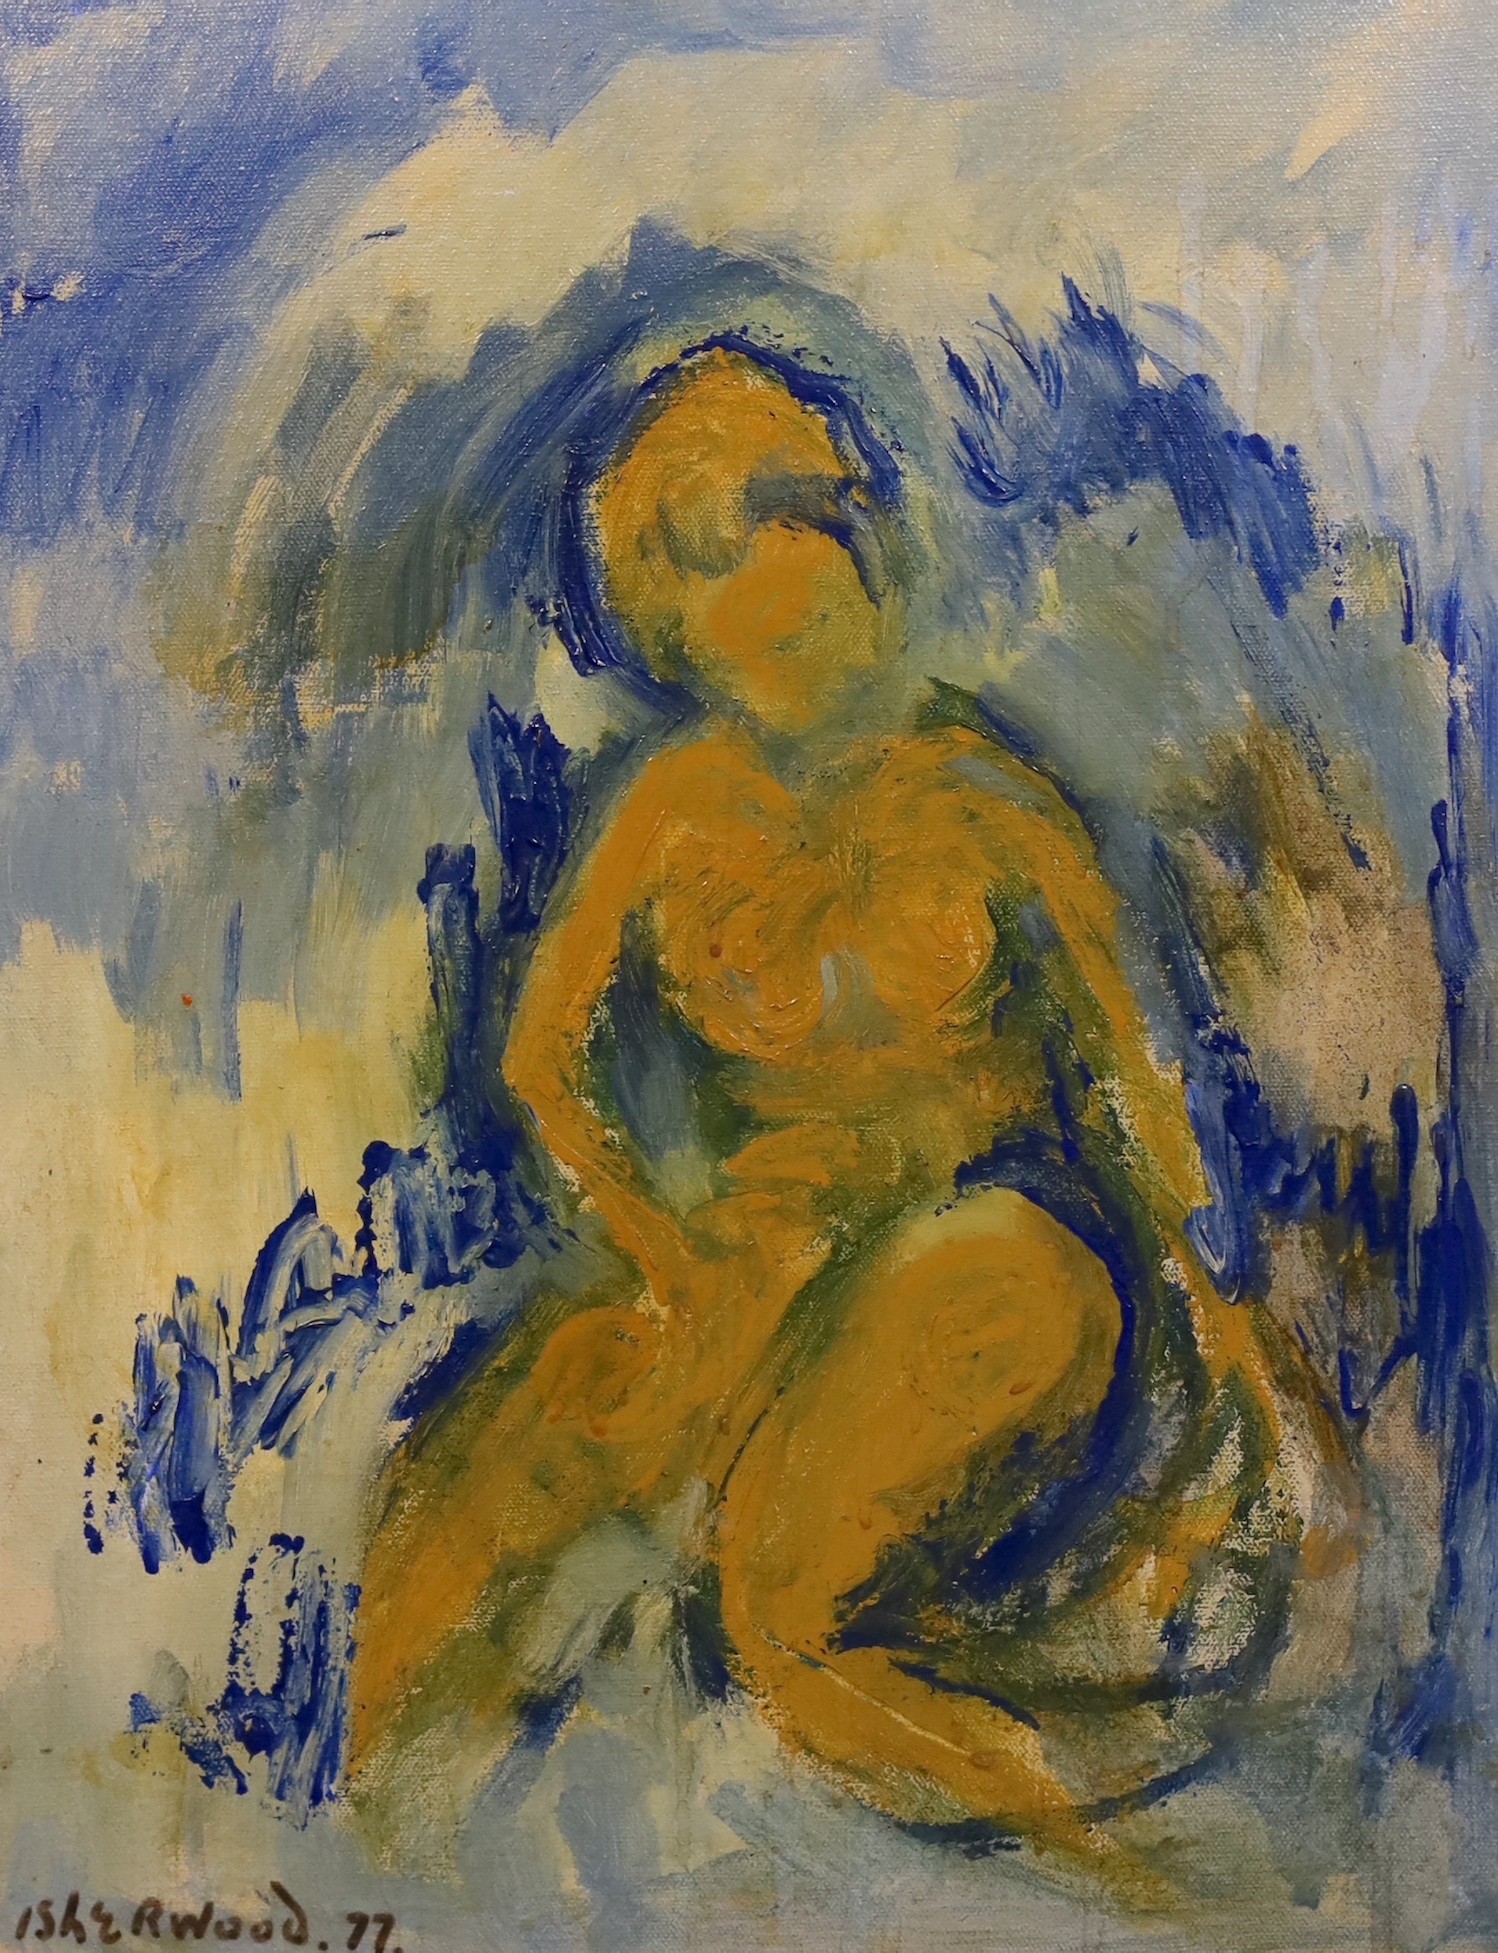 James Lawrence Isherwood (British, 1917- 1989), 'Welsh nude', oil on canvas, 45 x 35cm